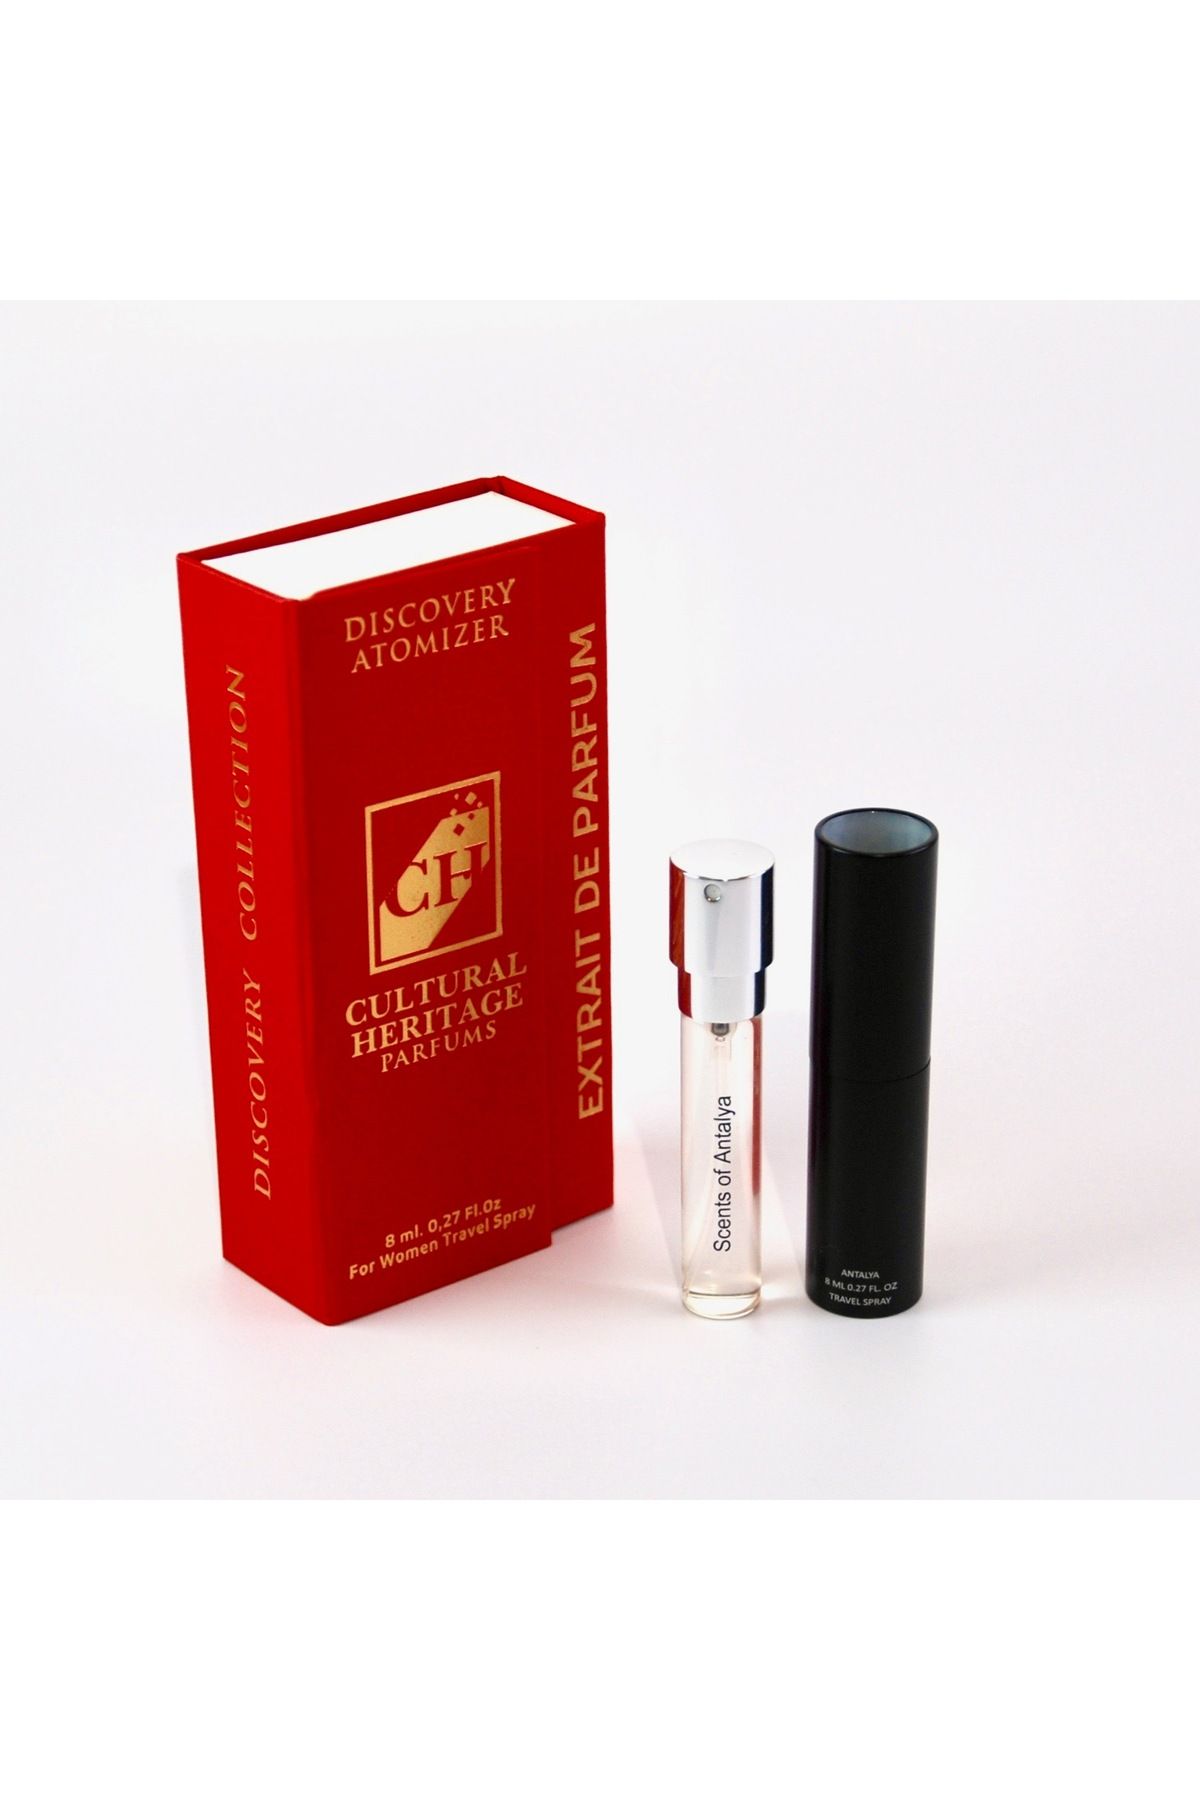 CH CULTURAL HERITAGE , Scents Of Antalya Discovery Atomizer Travel Spray , For Women,